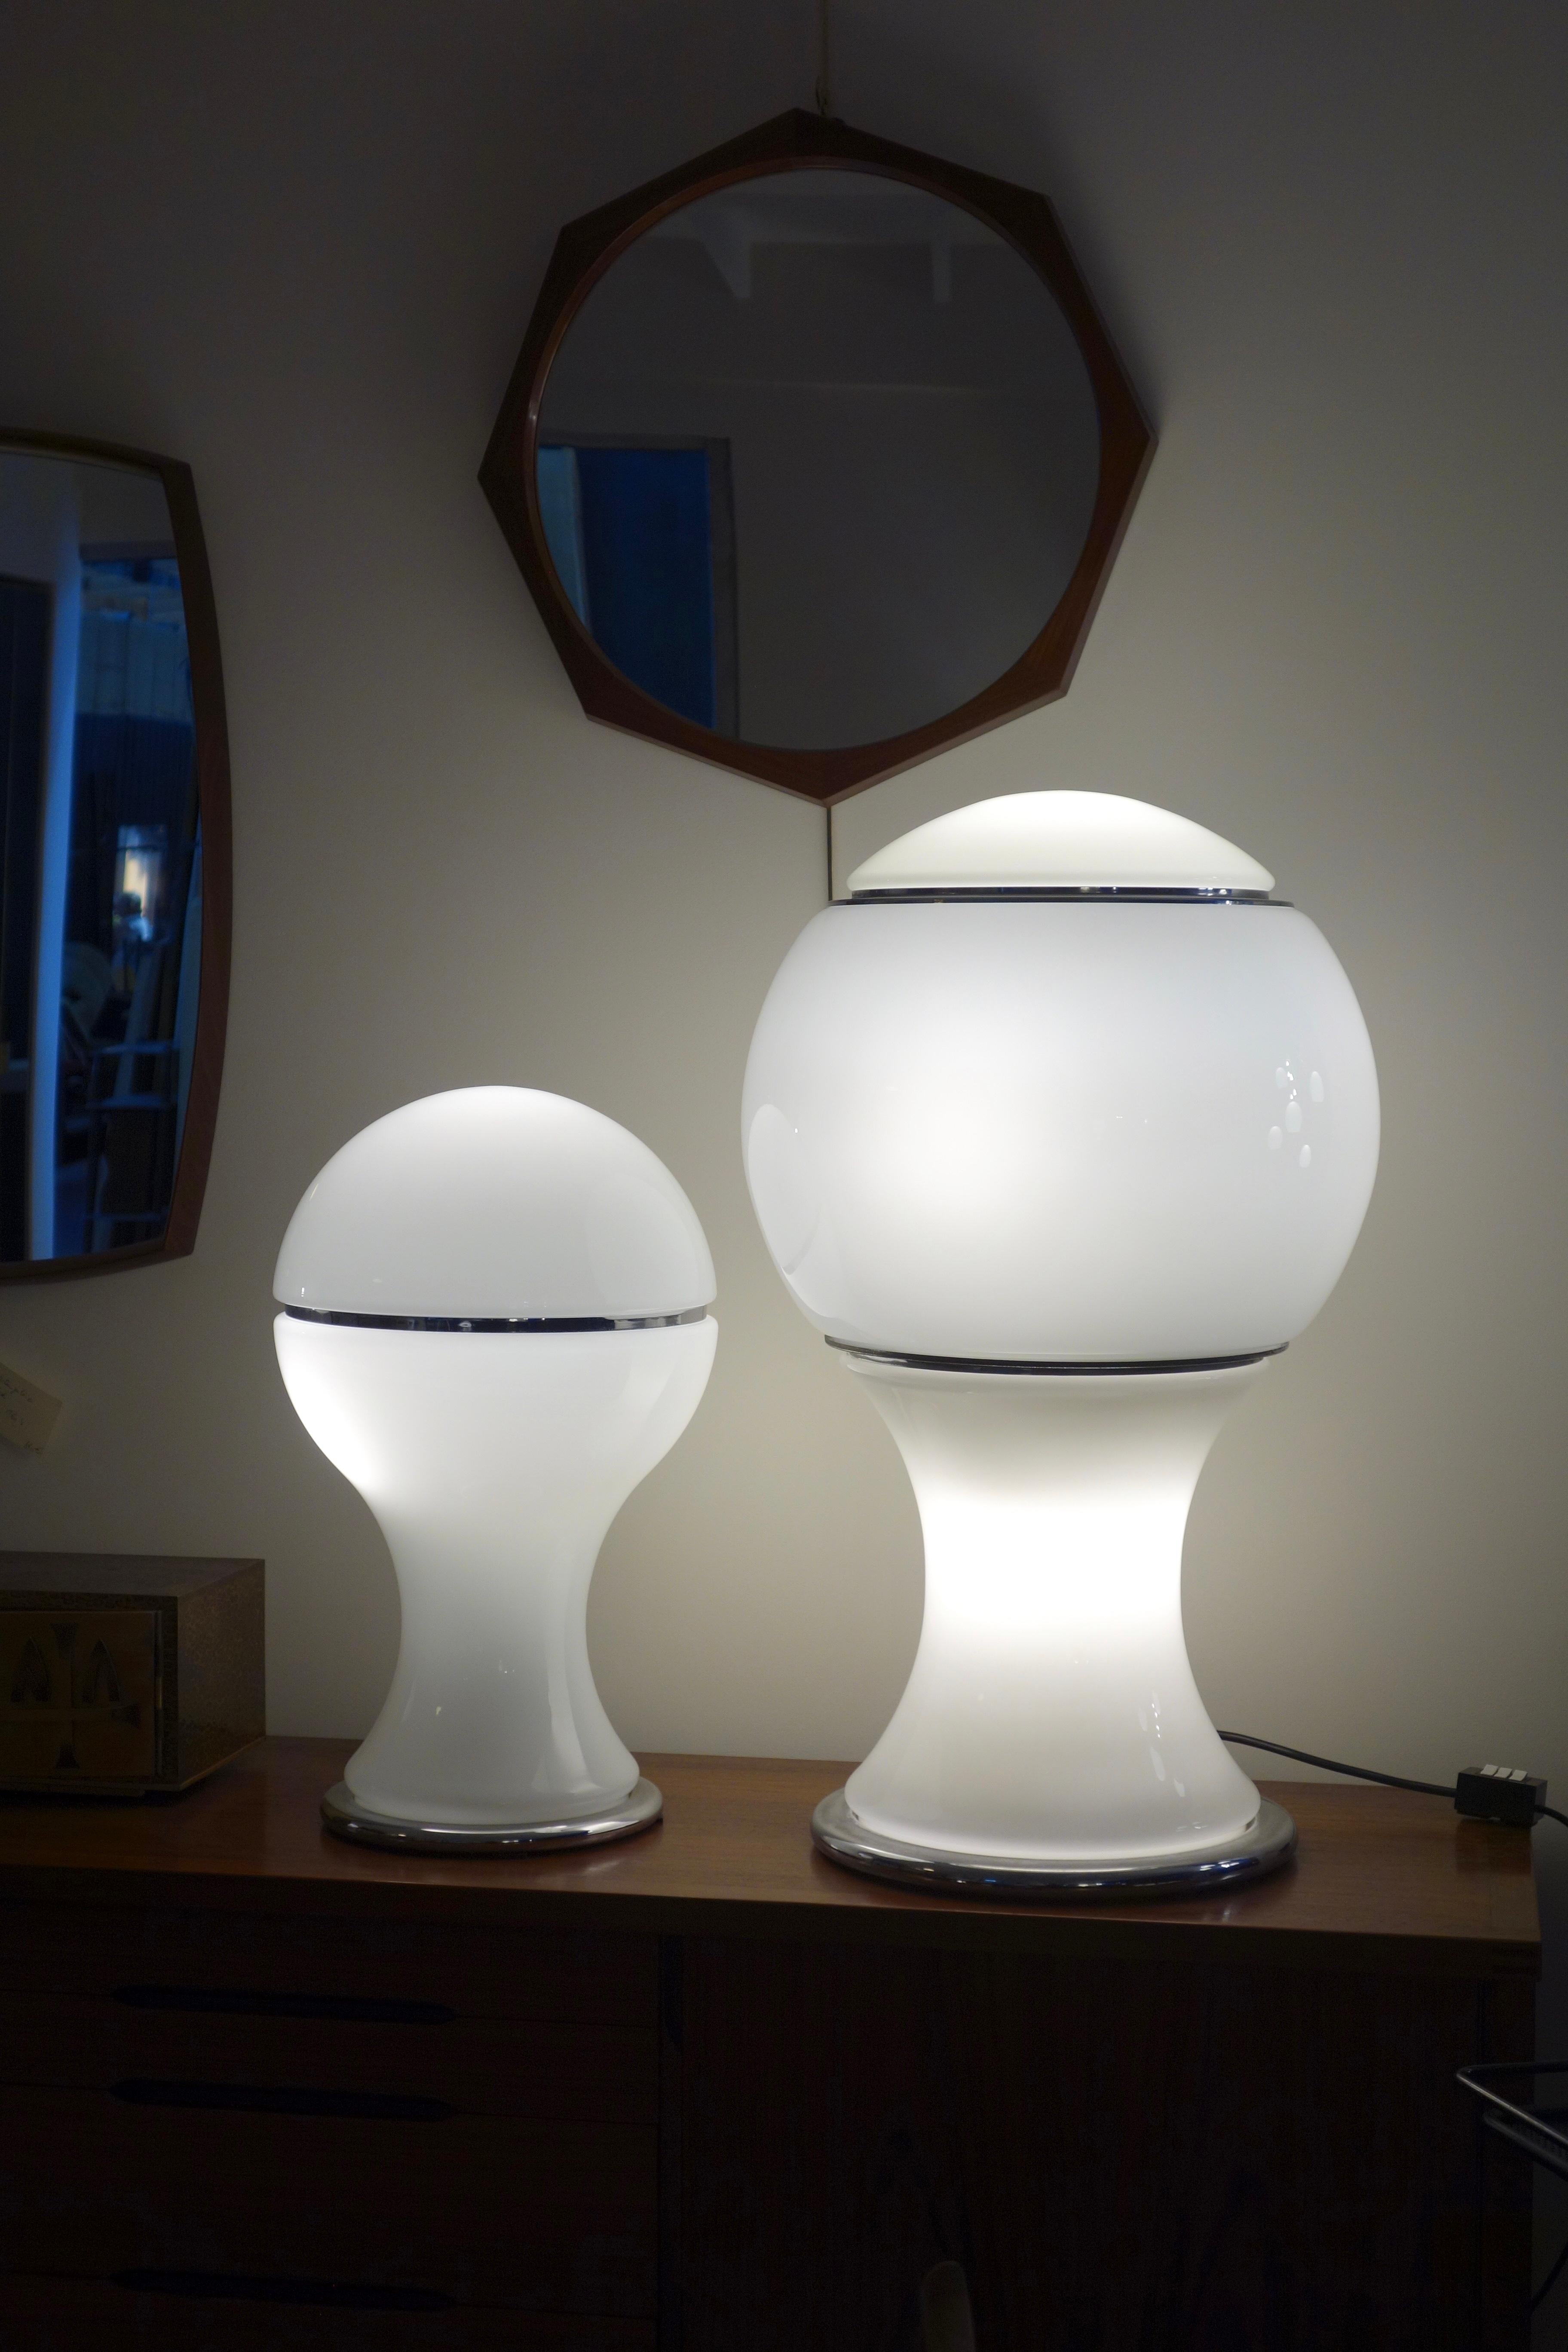 Set of two “Mongolfiera” lamps by Gianni Celada for Fontana Arte dating from 1968. Italian manufacturing of very good quality work. No longer edited today. They consist of a chrome steel structure on which several parts of blown opaline Murano glass